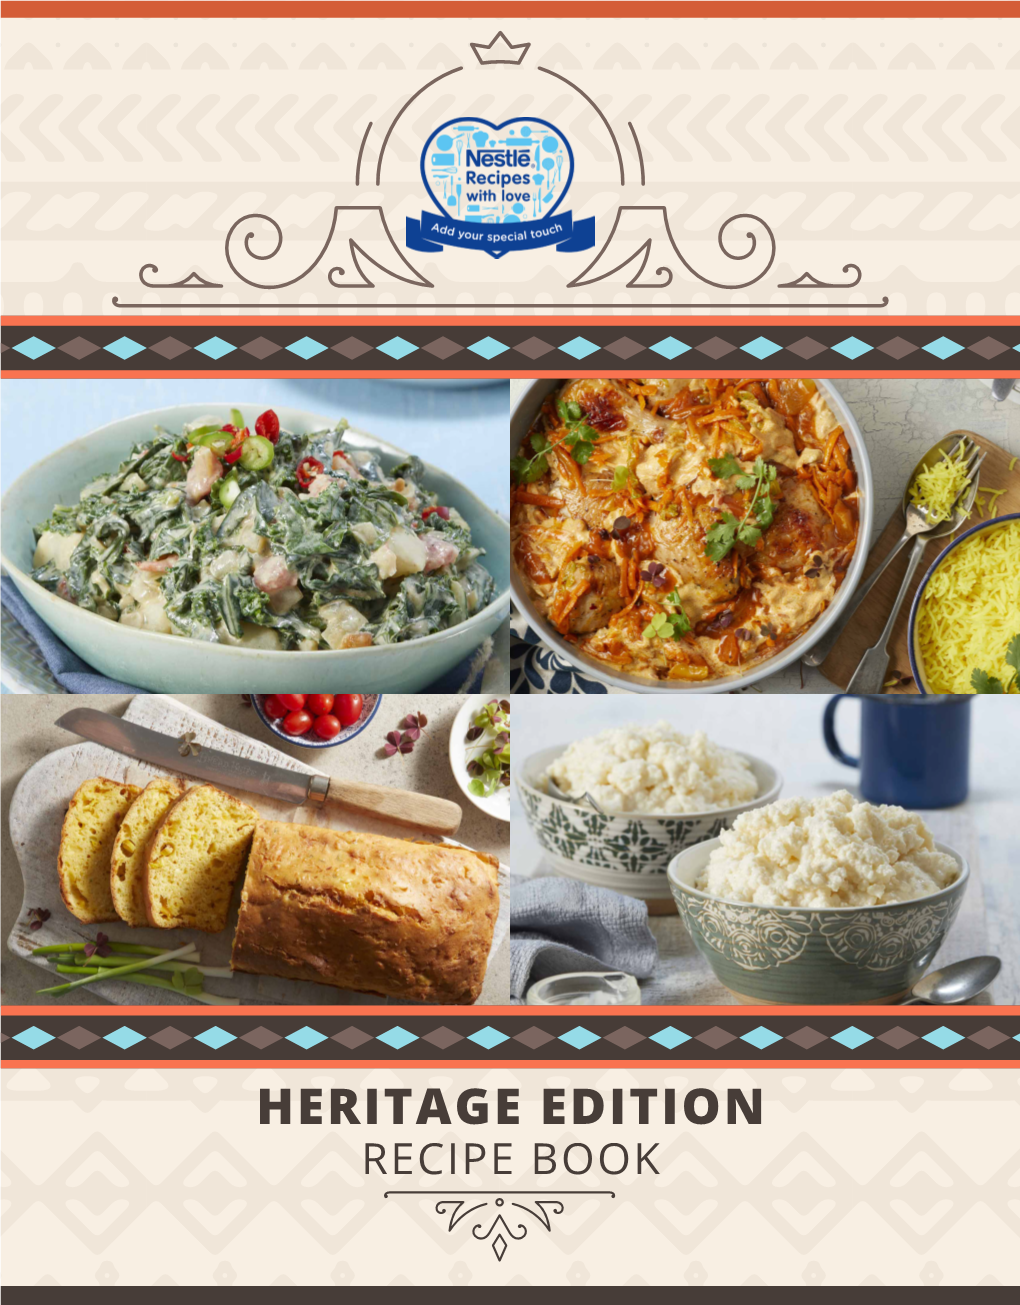 Heritage Edition Recipe Book Icons of Heritage